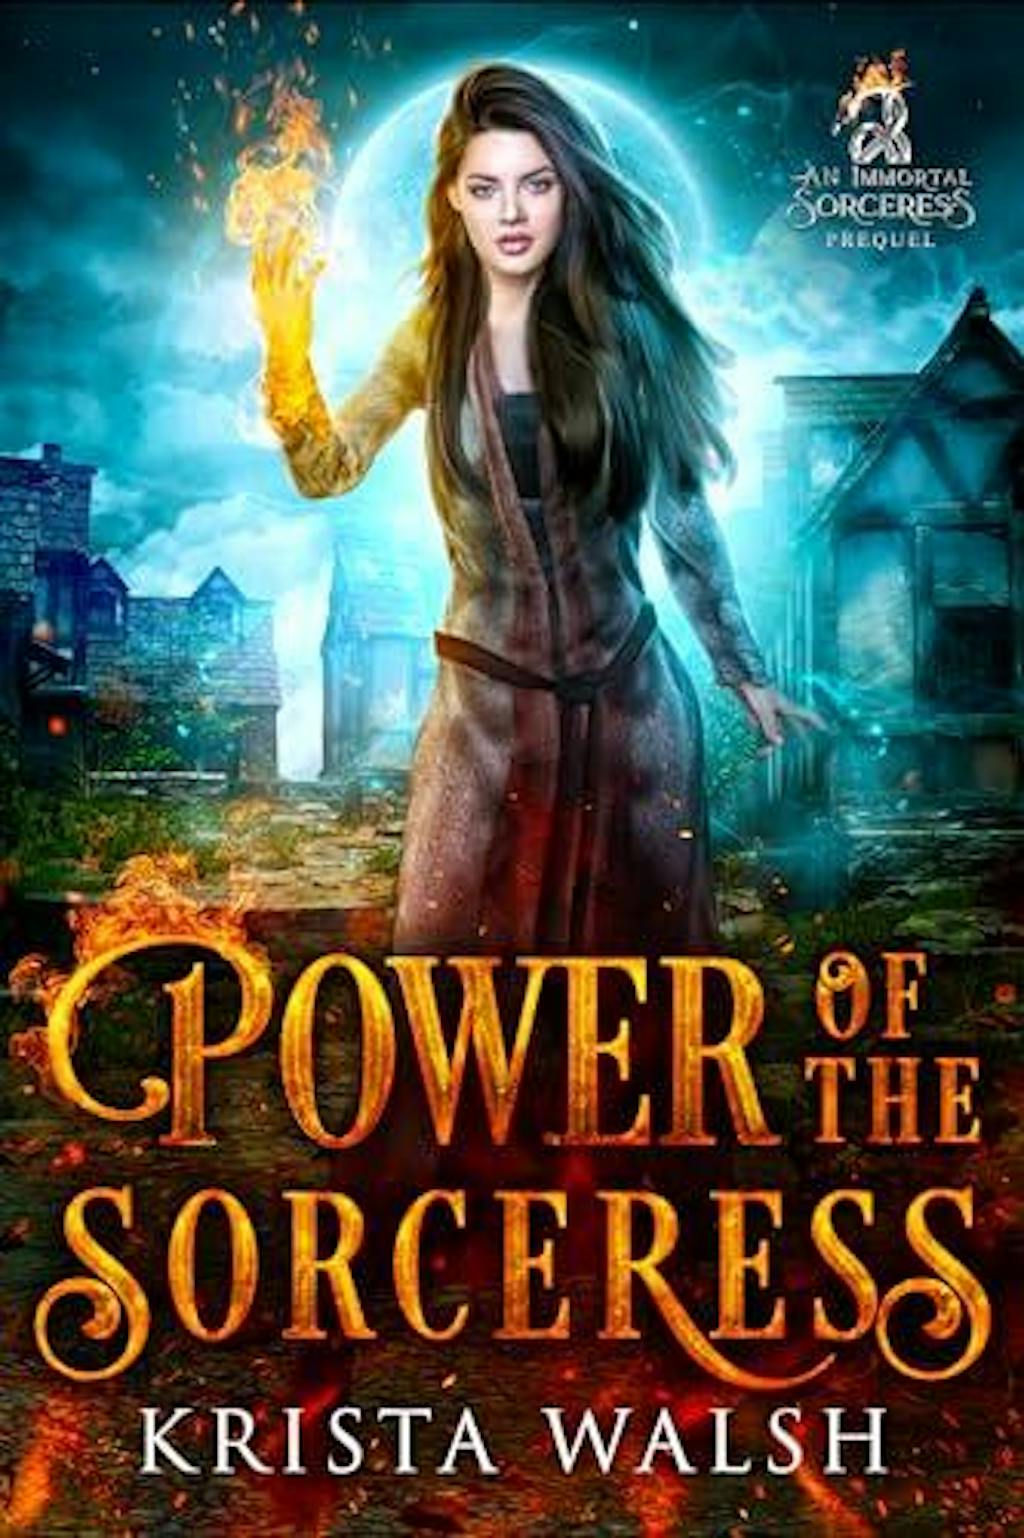 Power Of The Sorceress The Immortal Sorceress Prequel Krista Walsh Epic And Urban Fantasy Author 1432